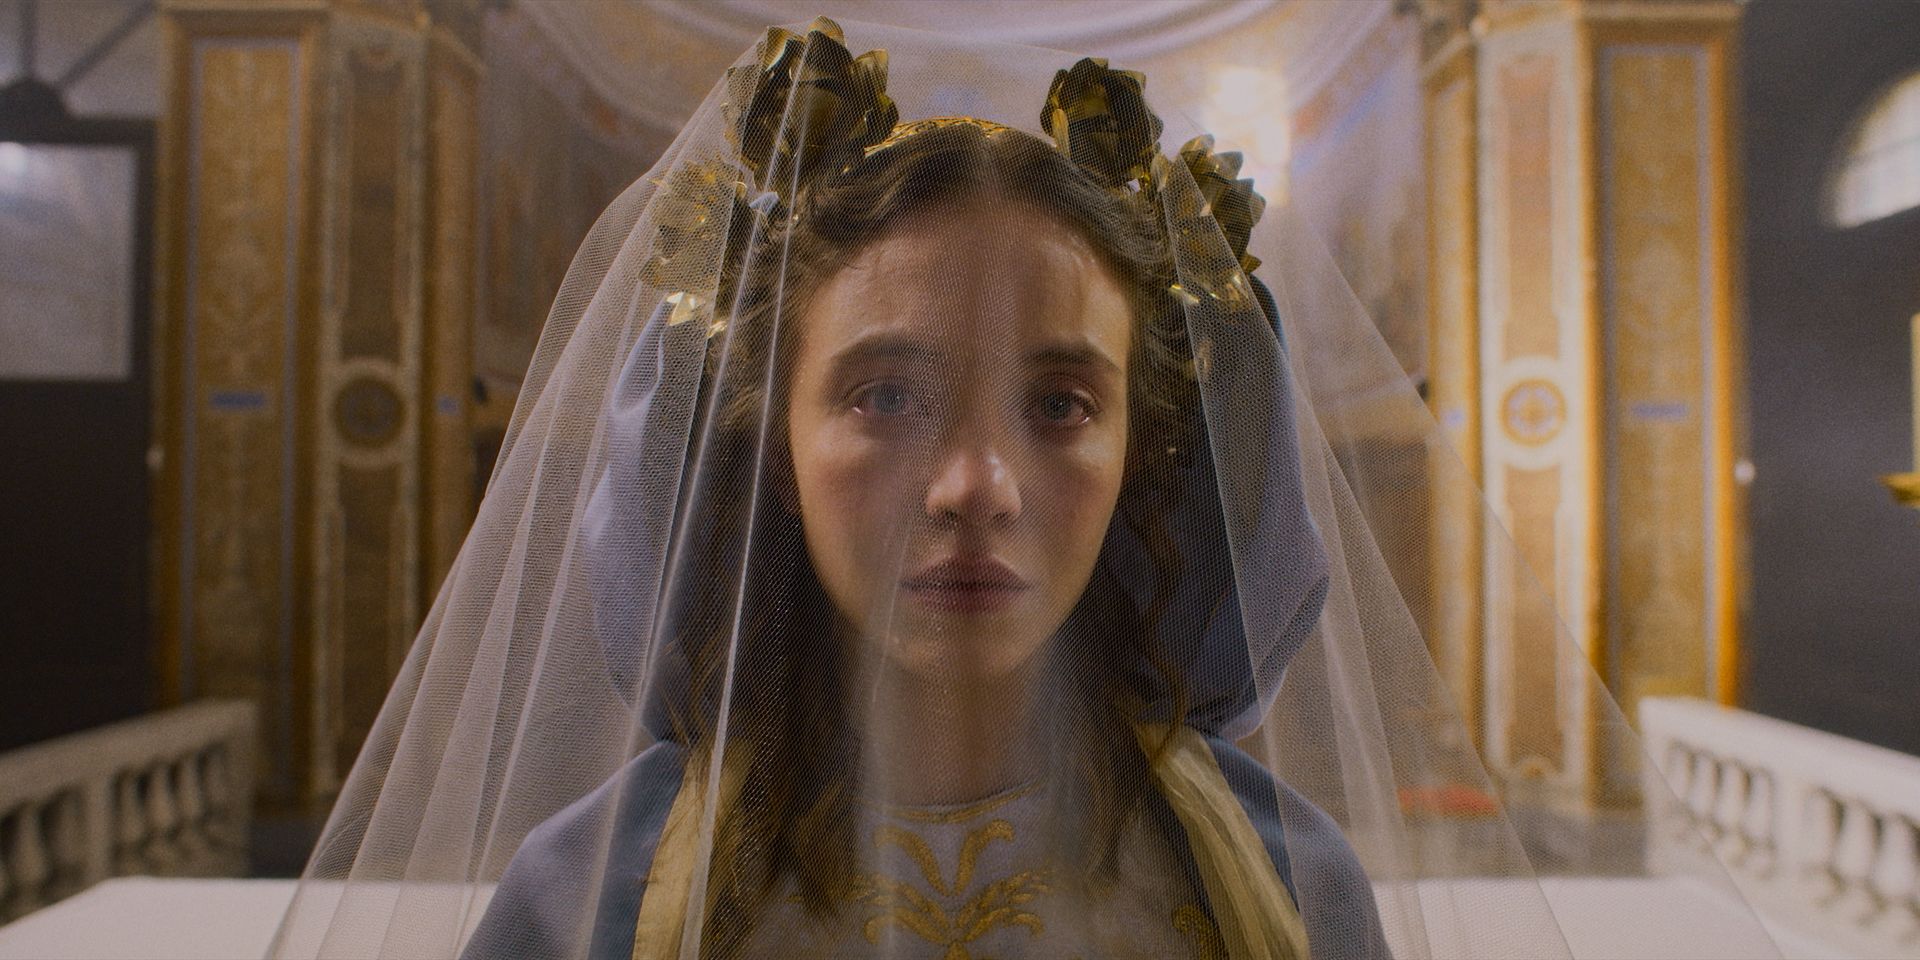 Sydney Sweeney as Sister Cecilia wears a veil in Immaculate